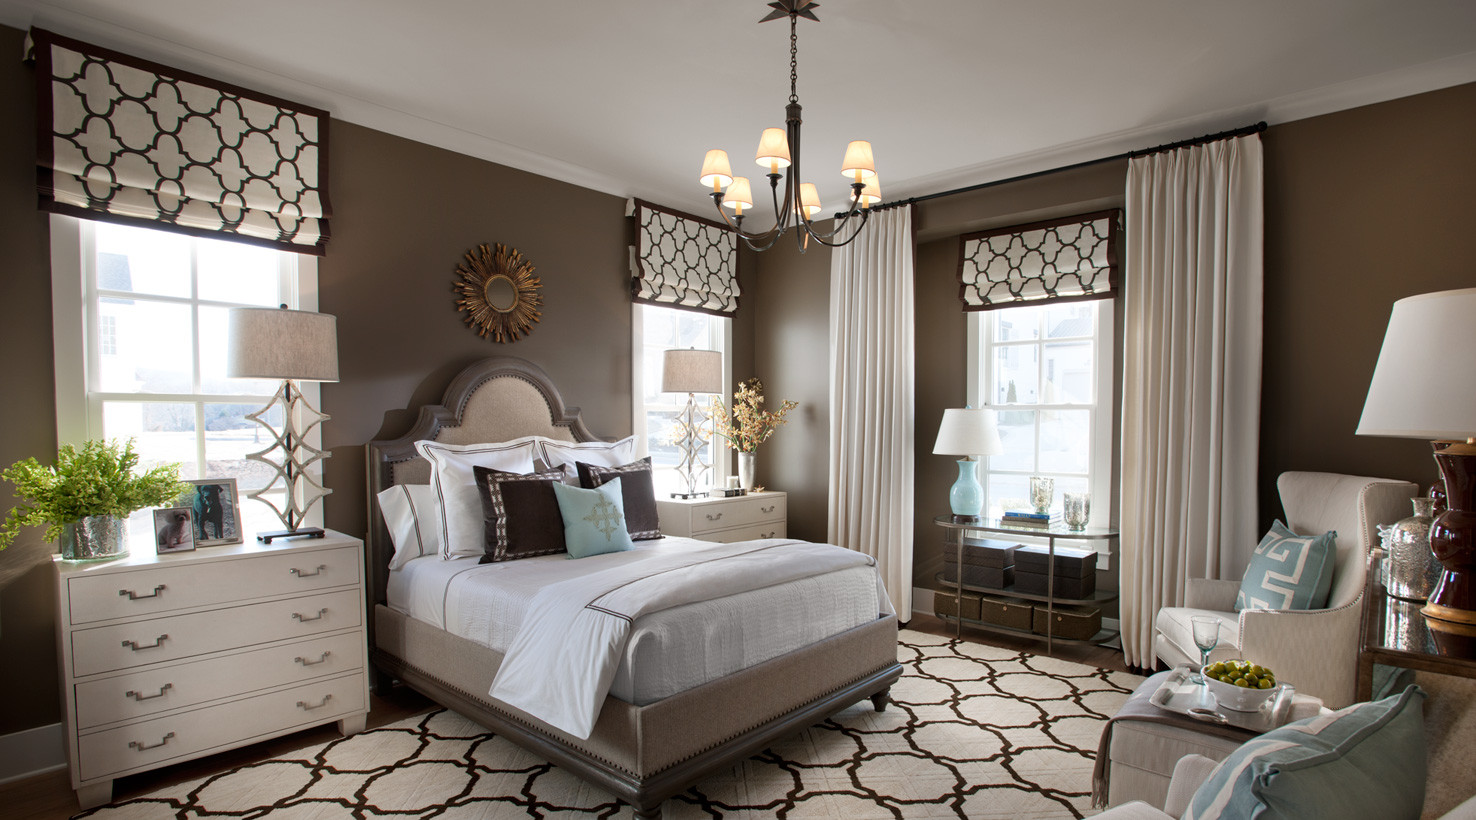 Sherwin Williams Bedroom Colors
 The HGTV Smart Home 2015 Sponsored by Sherwin Williams